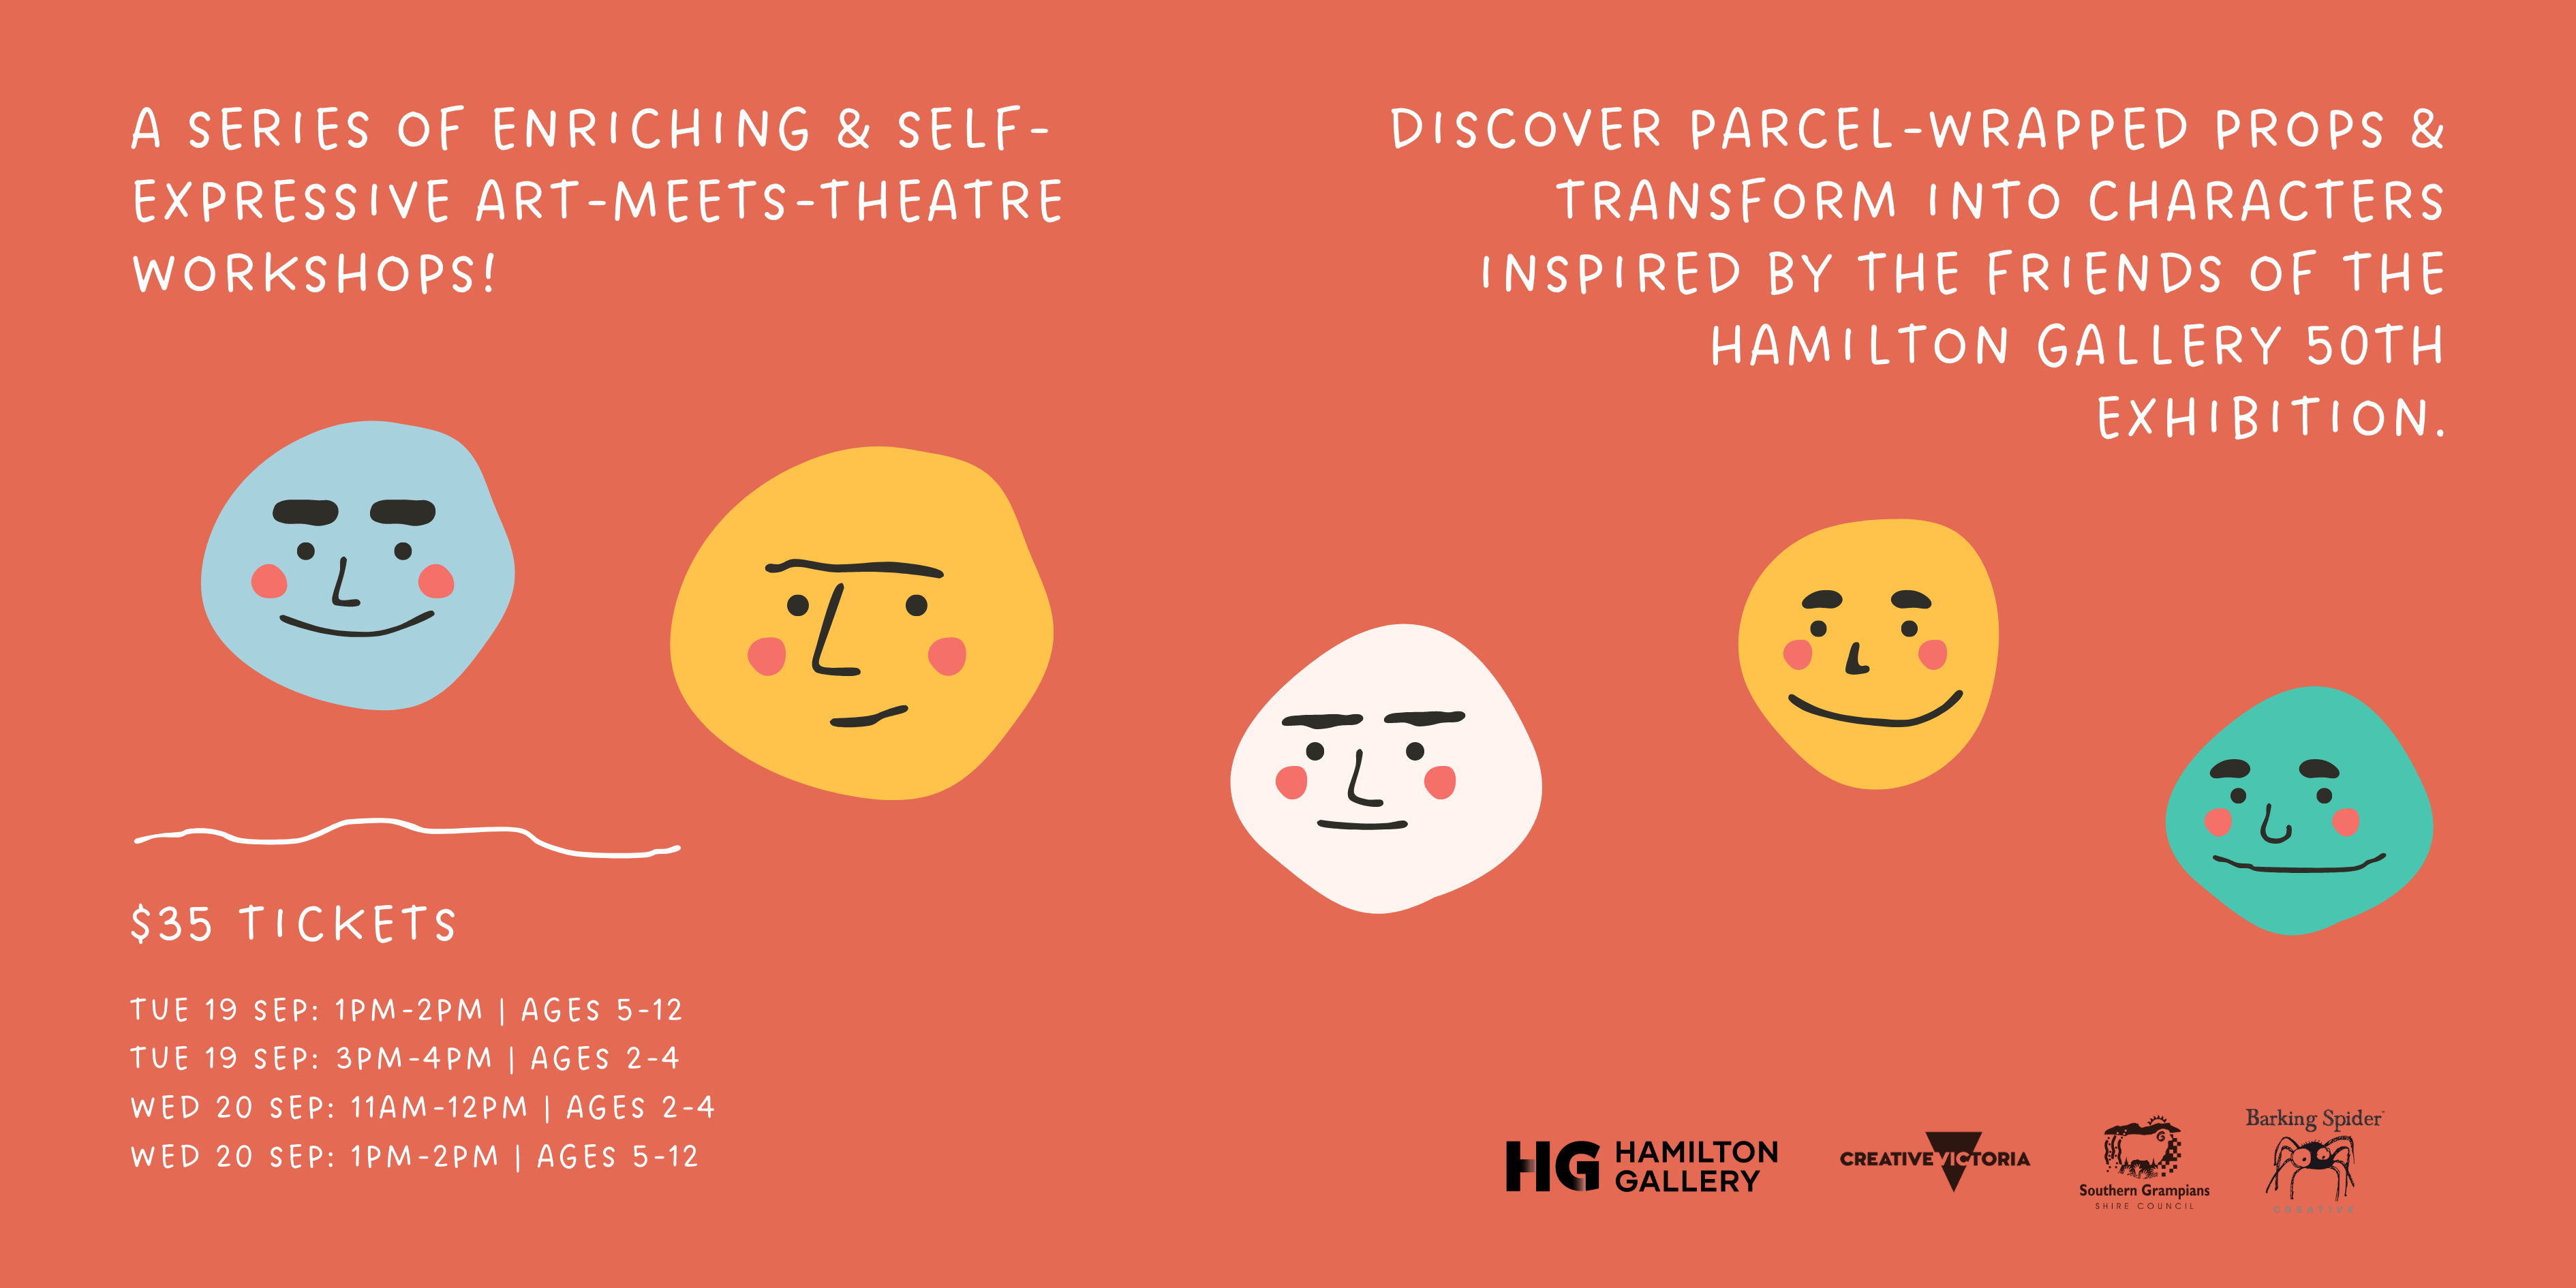 a series of enriching & self-expressive art-meets-theatre workshops!